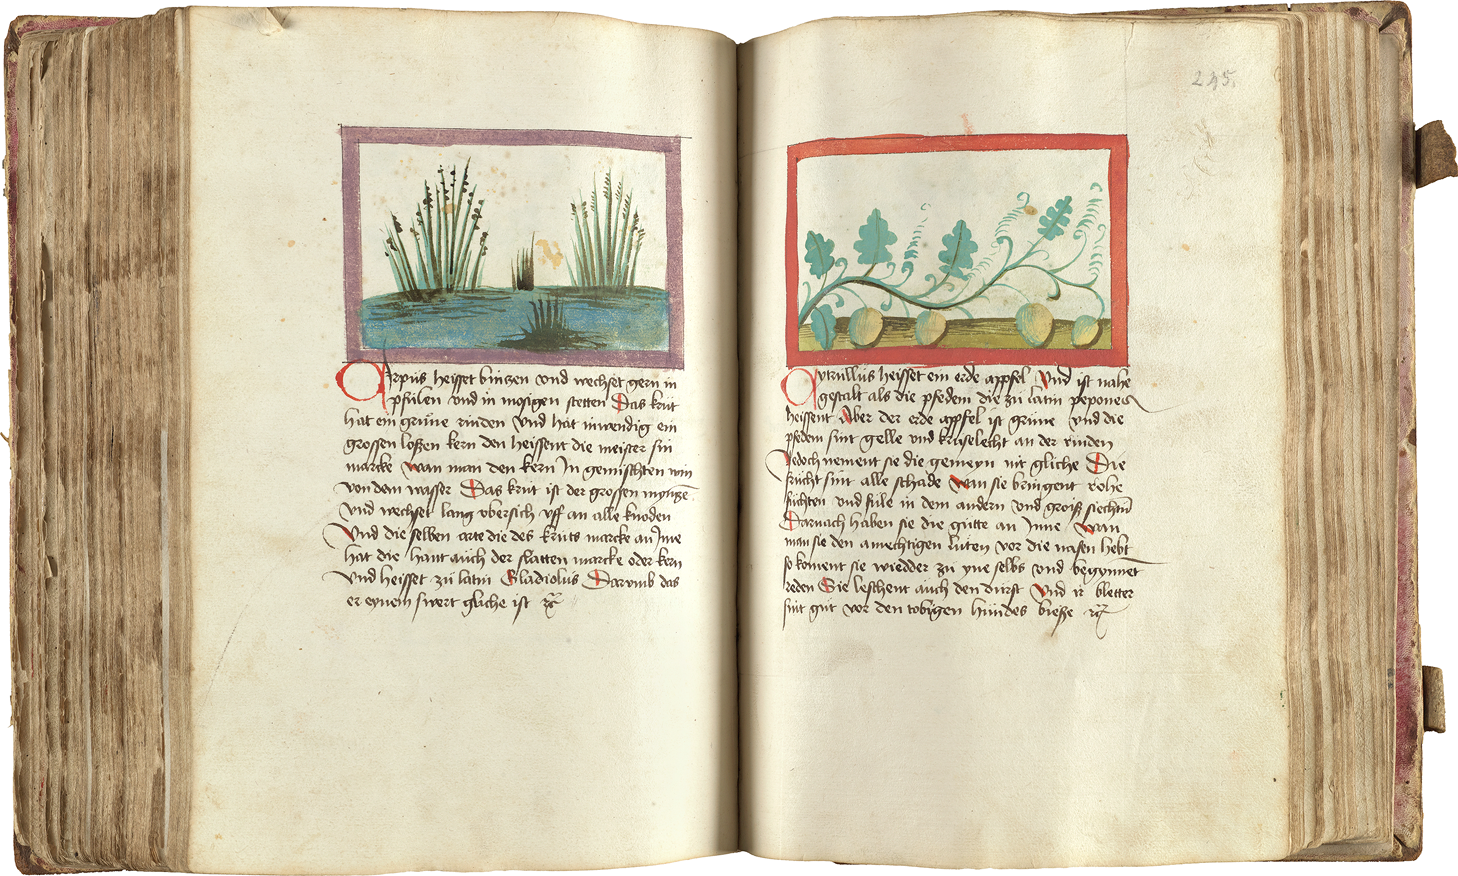   A rare manuscript copy of the 14th-century German  magister  Konrad von Megenberg's  Buch der Natur  is illustrated with drawings about agronomy and natural history.  